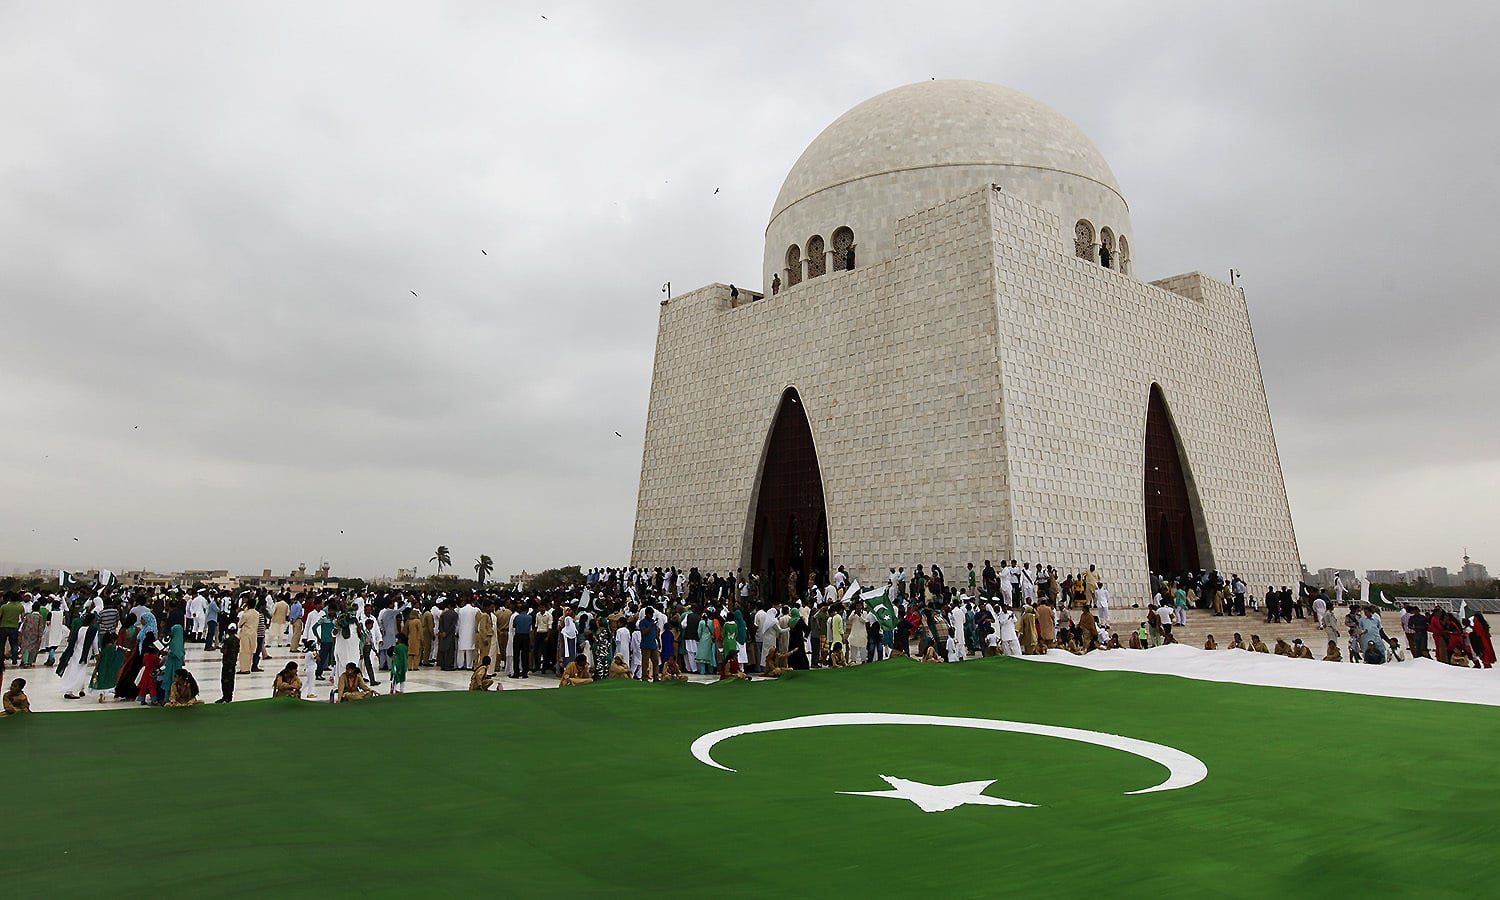 People gather near a national flag during a ceremony to celebrate the country's 69th Independence Day at the mausoleum of Muhammad Ali Jinnah in Karachi, Pakistan, August 14, 2015. Jinnah is generally regarded as the founder of Pakistan. REUTERS/Akhtar Soomro